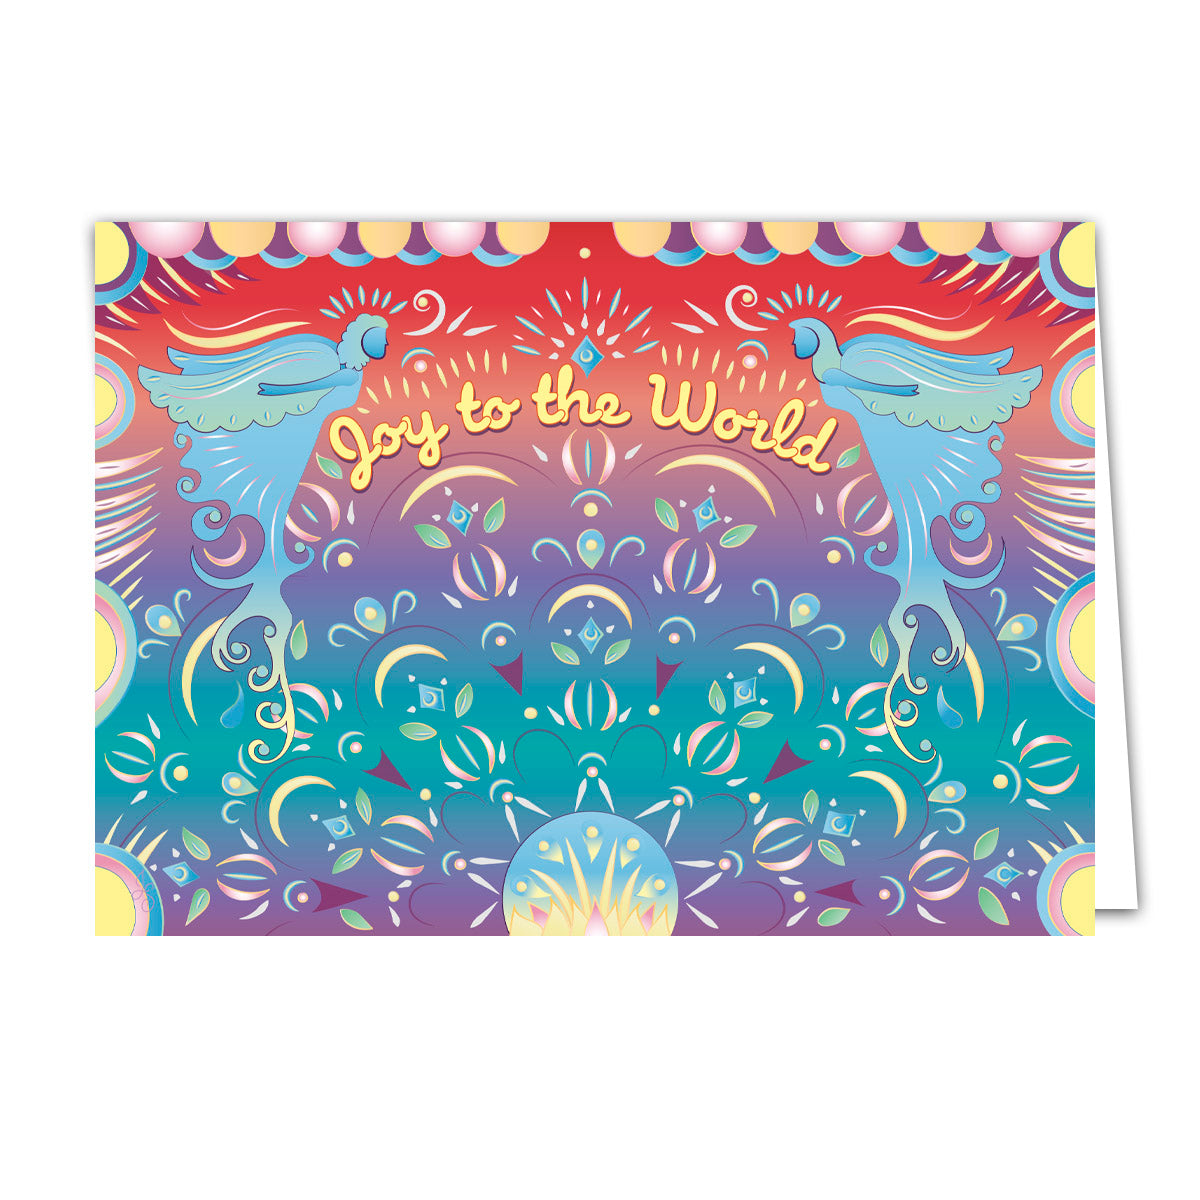 Mockup for greeting card digital design showing an imaginary illustration with designs and two angelic figures flying around the phrase “Joy to the World”